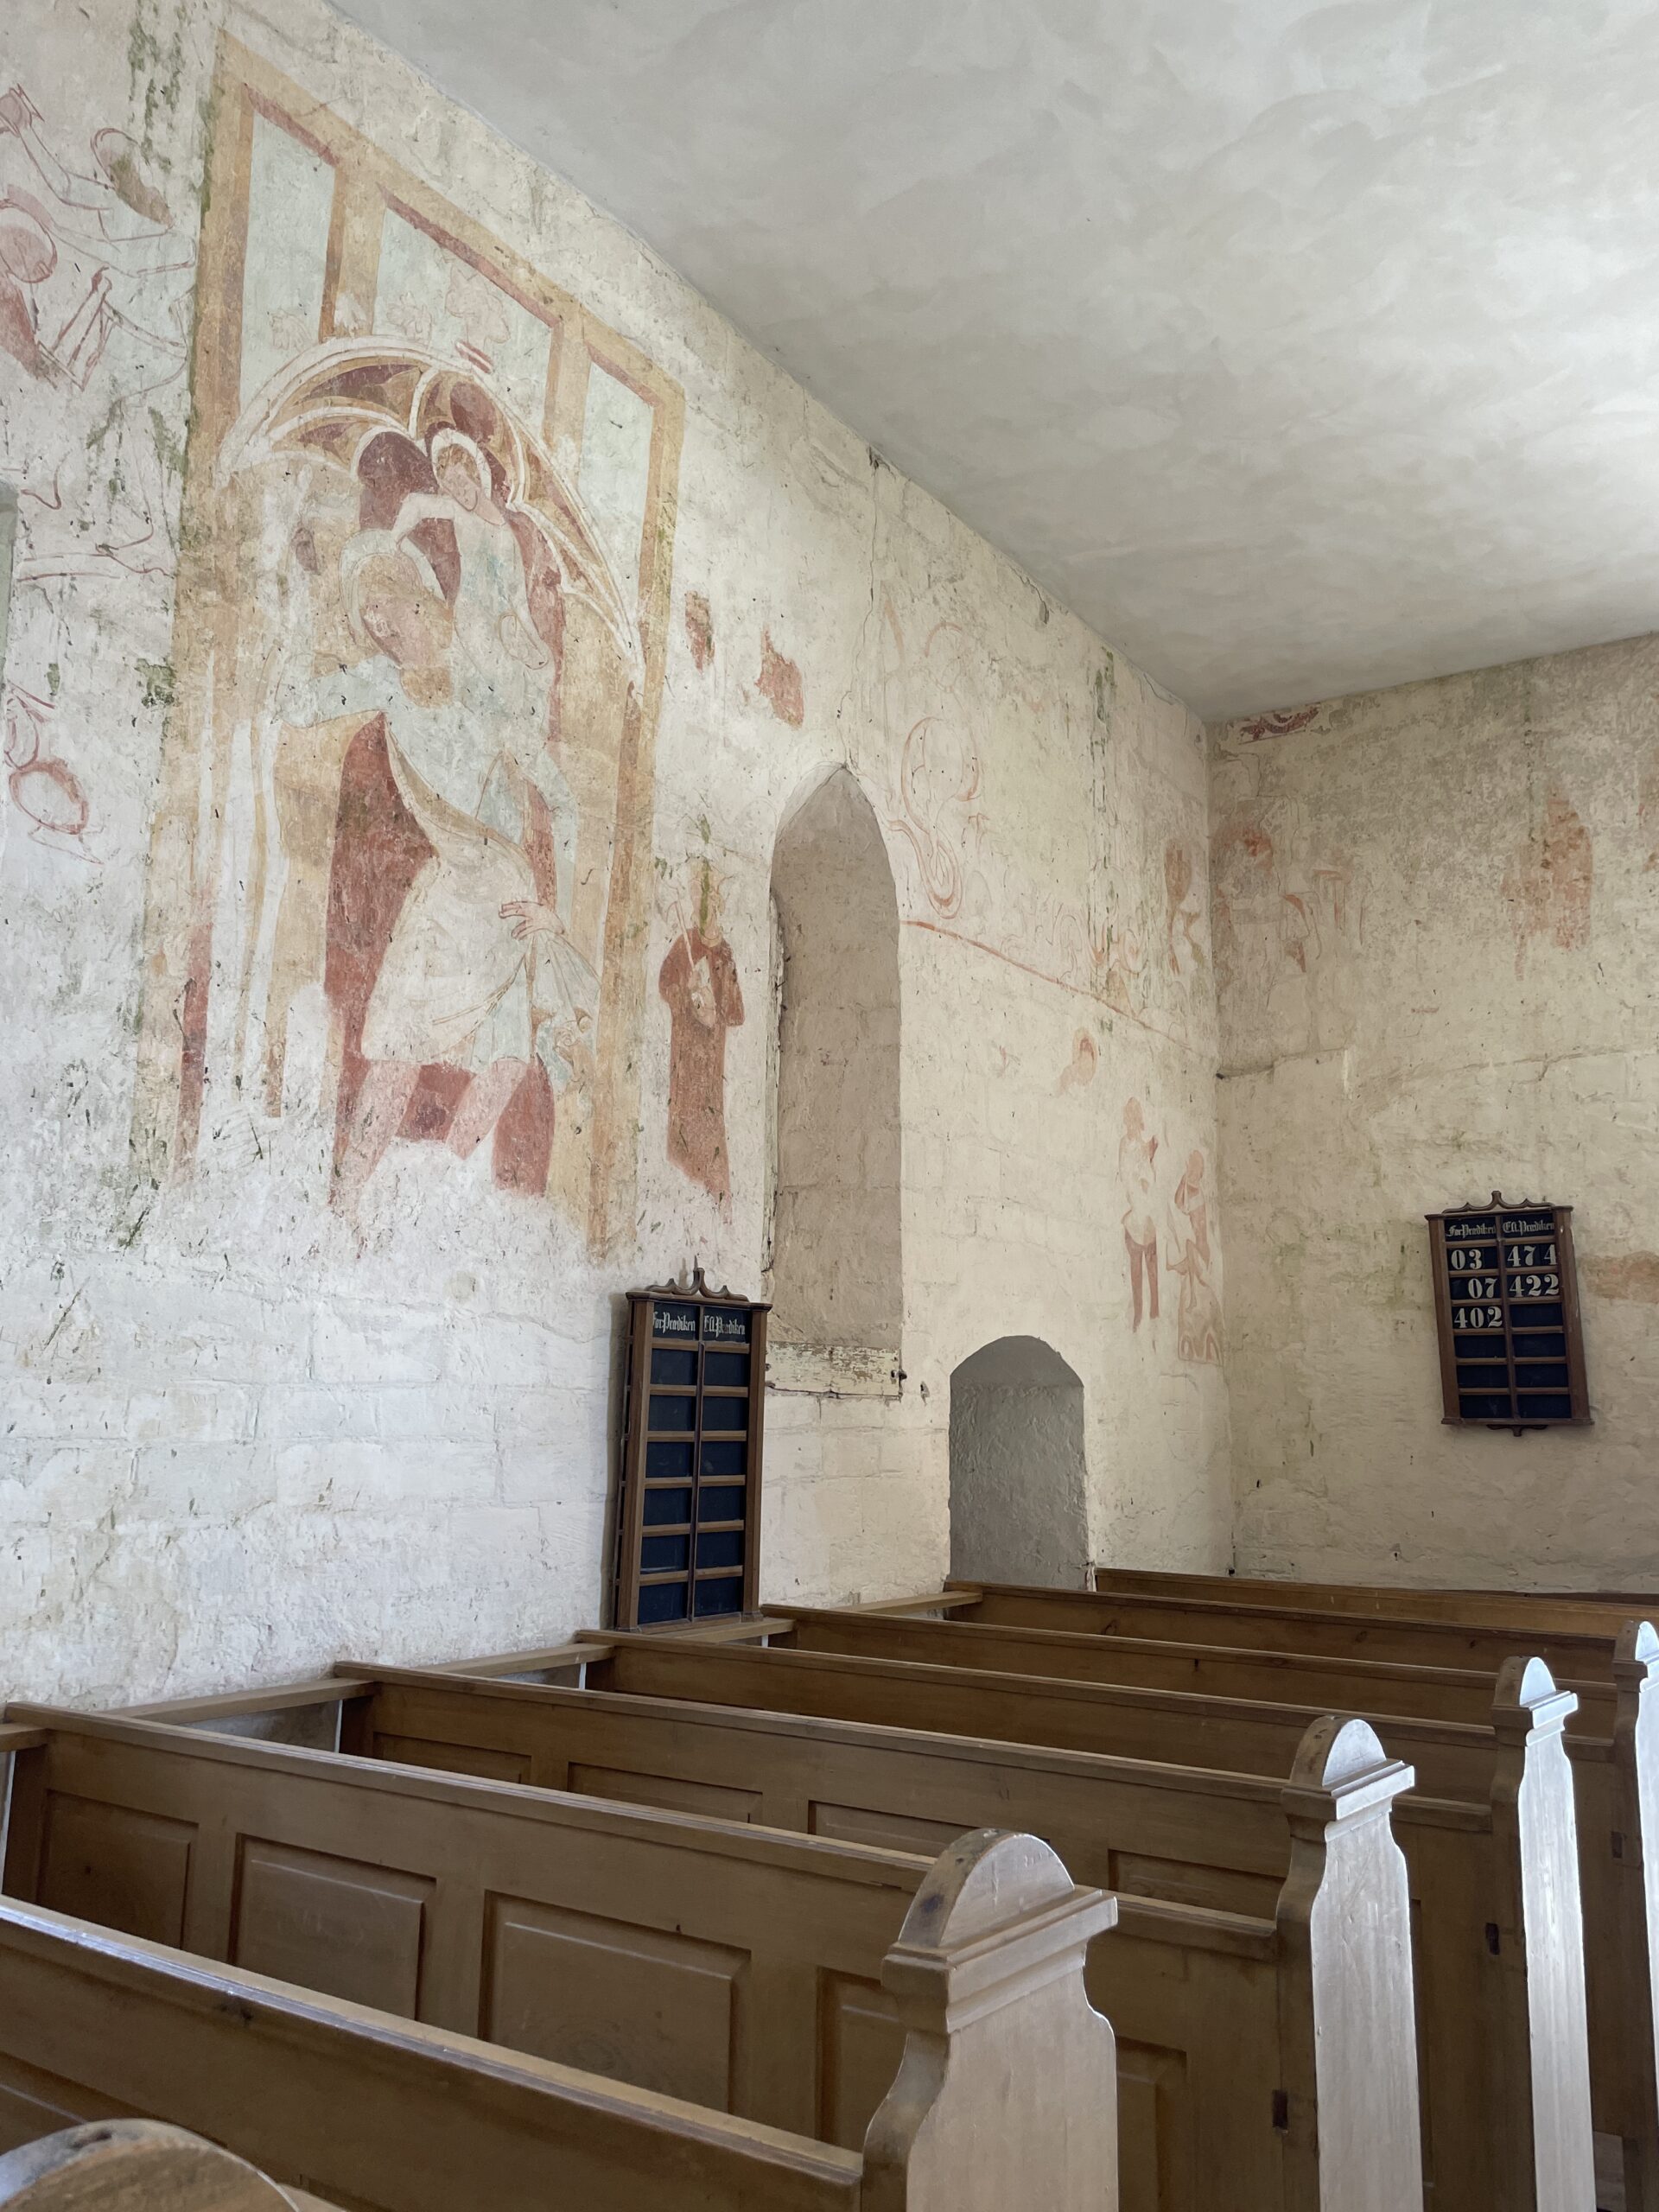 The interior of Højerup old church in Stevns Klint Denmark. There are old faded religious imagery on the walls that look medieval. 